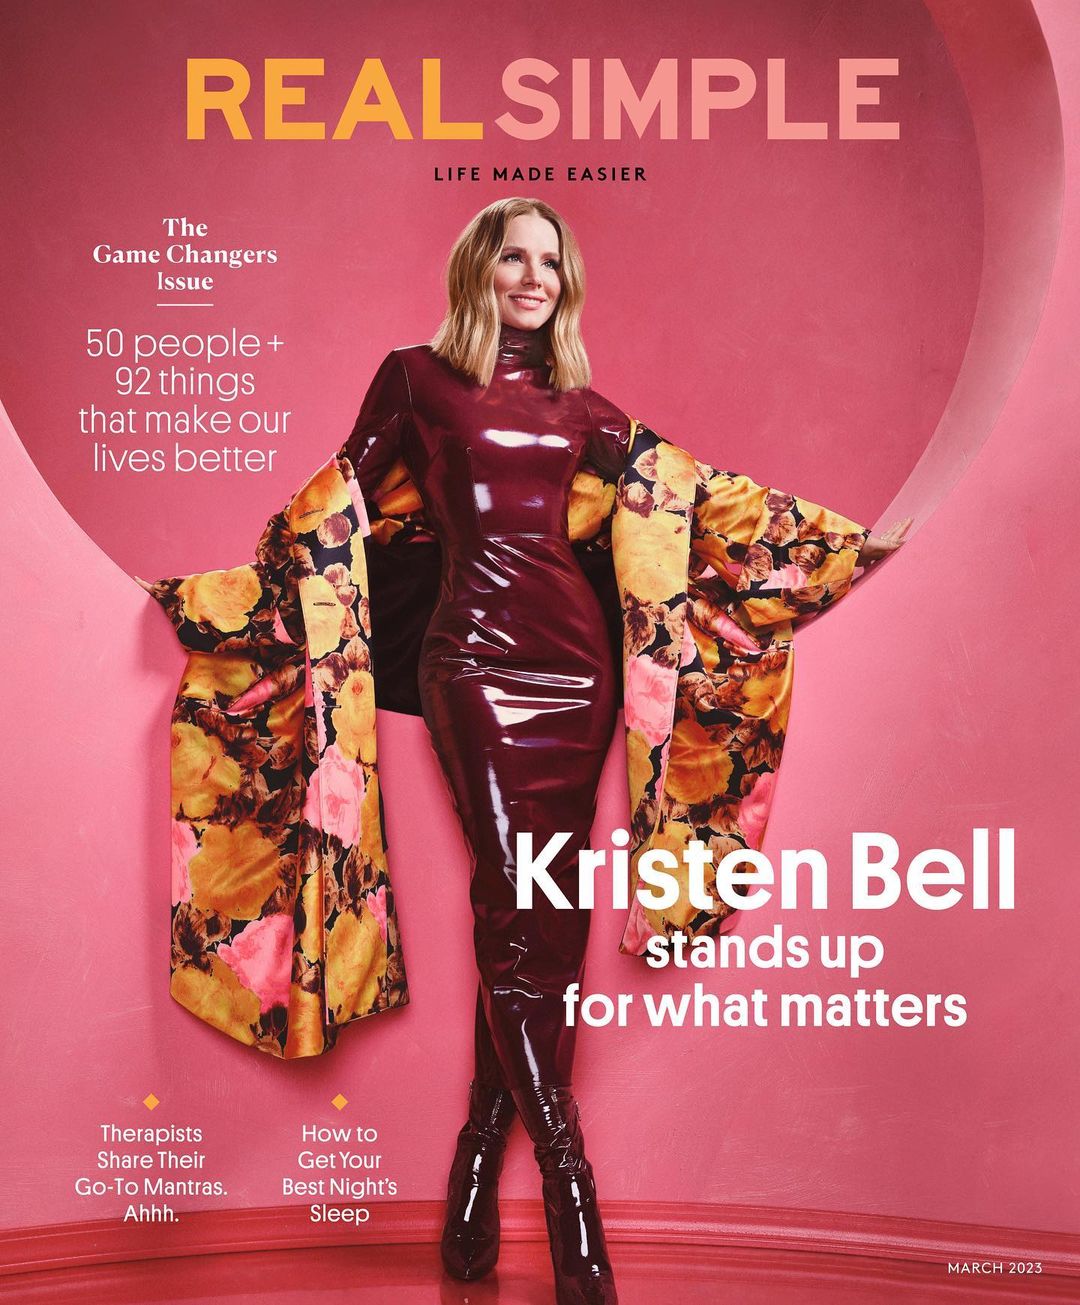 Kristen Bell on the cover of Real Simple magazine.